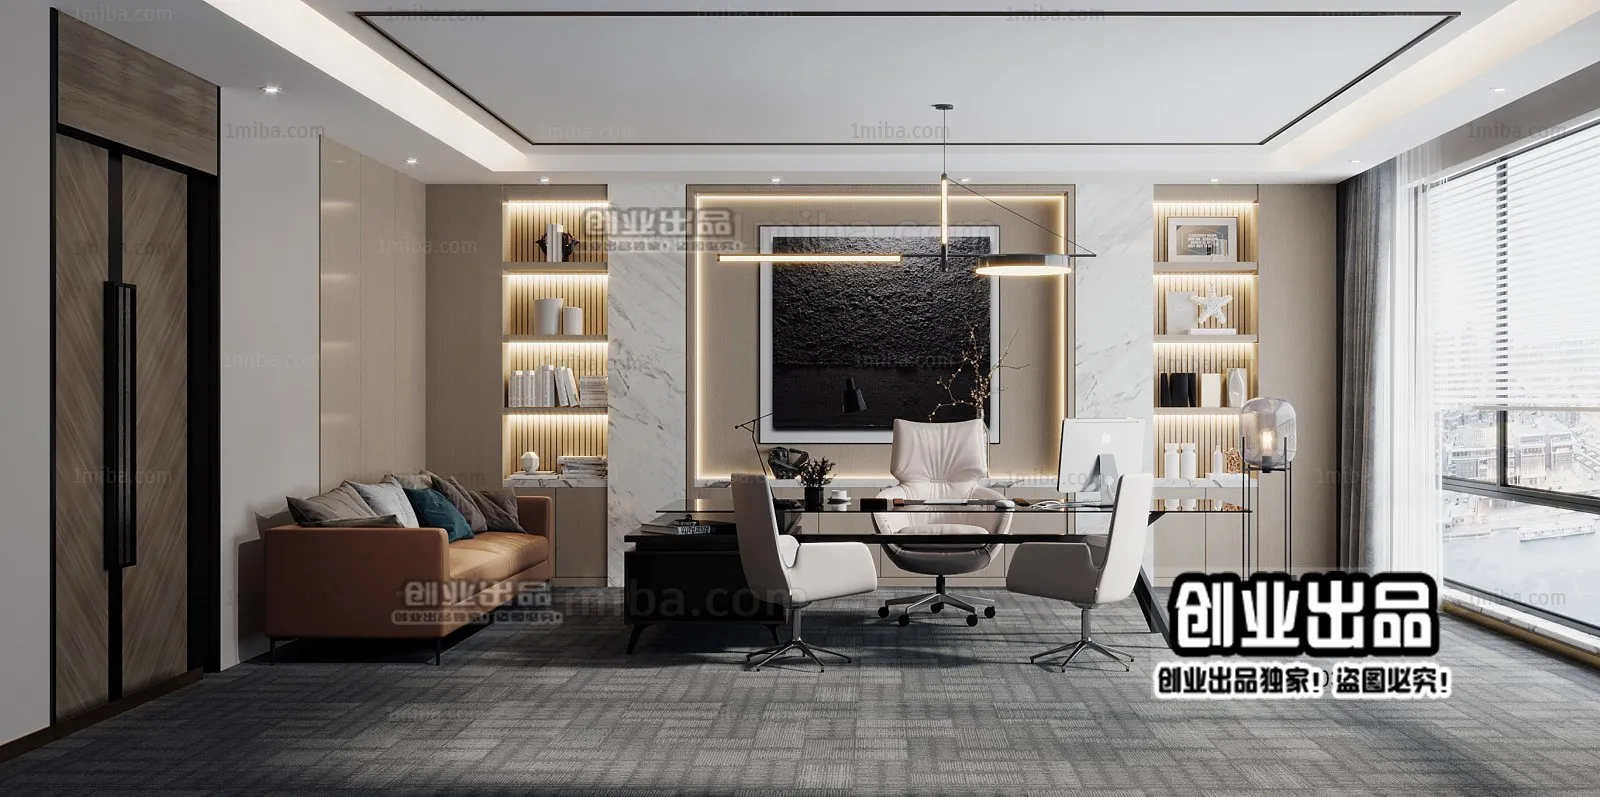 3D OFFICE INTERIOR (VRAY) – MANAGER ROOM 3D SCENES – 034